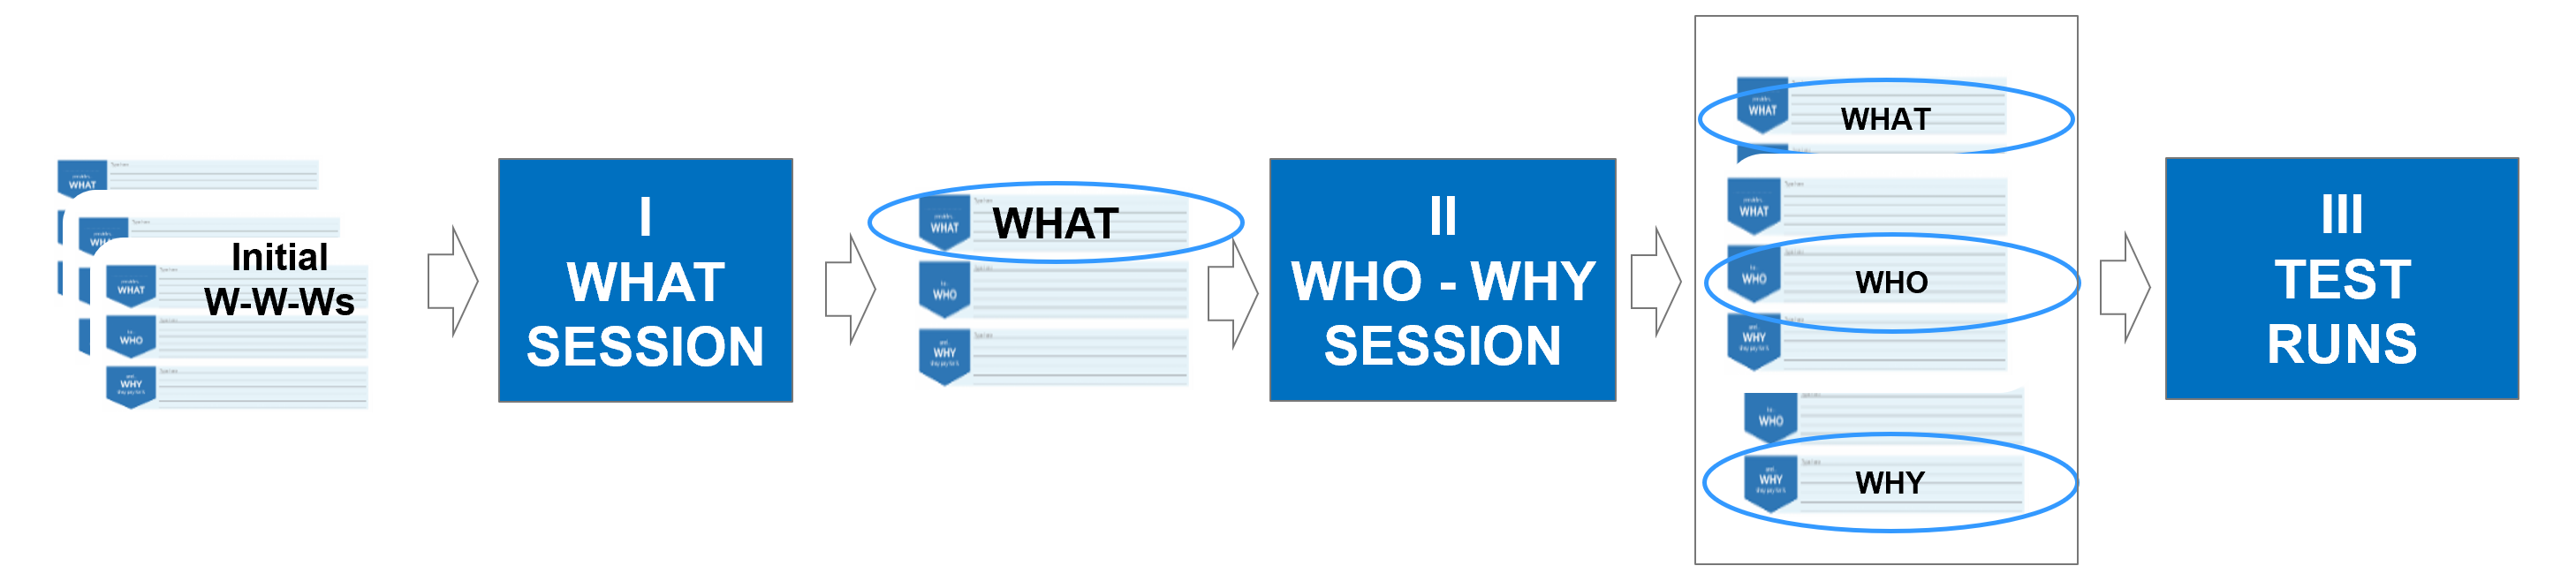 W-W-W Workshop Sessions Sequence